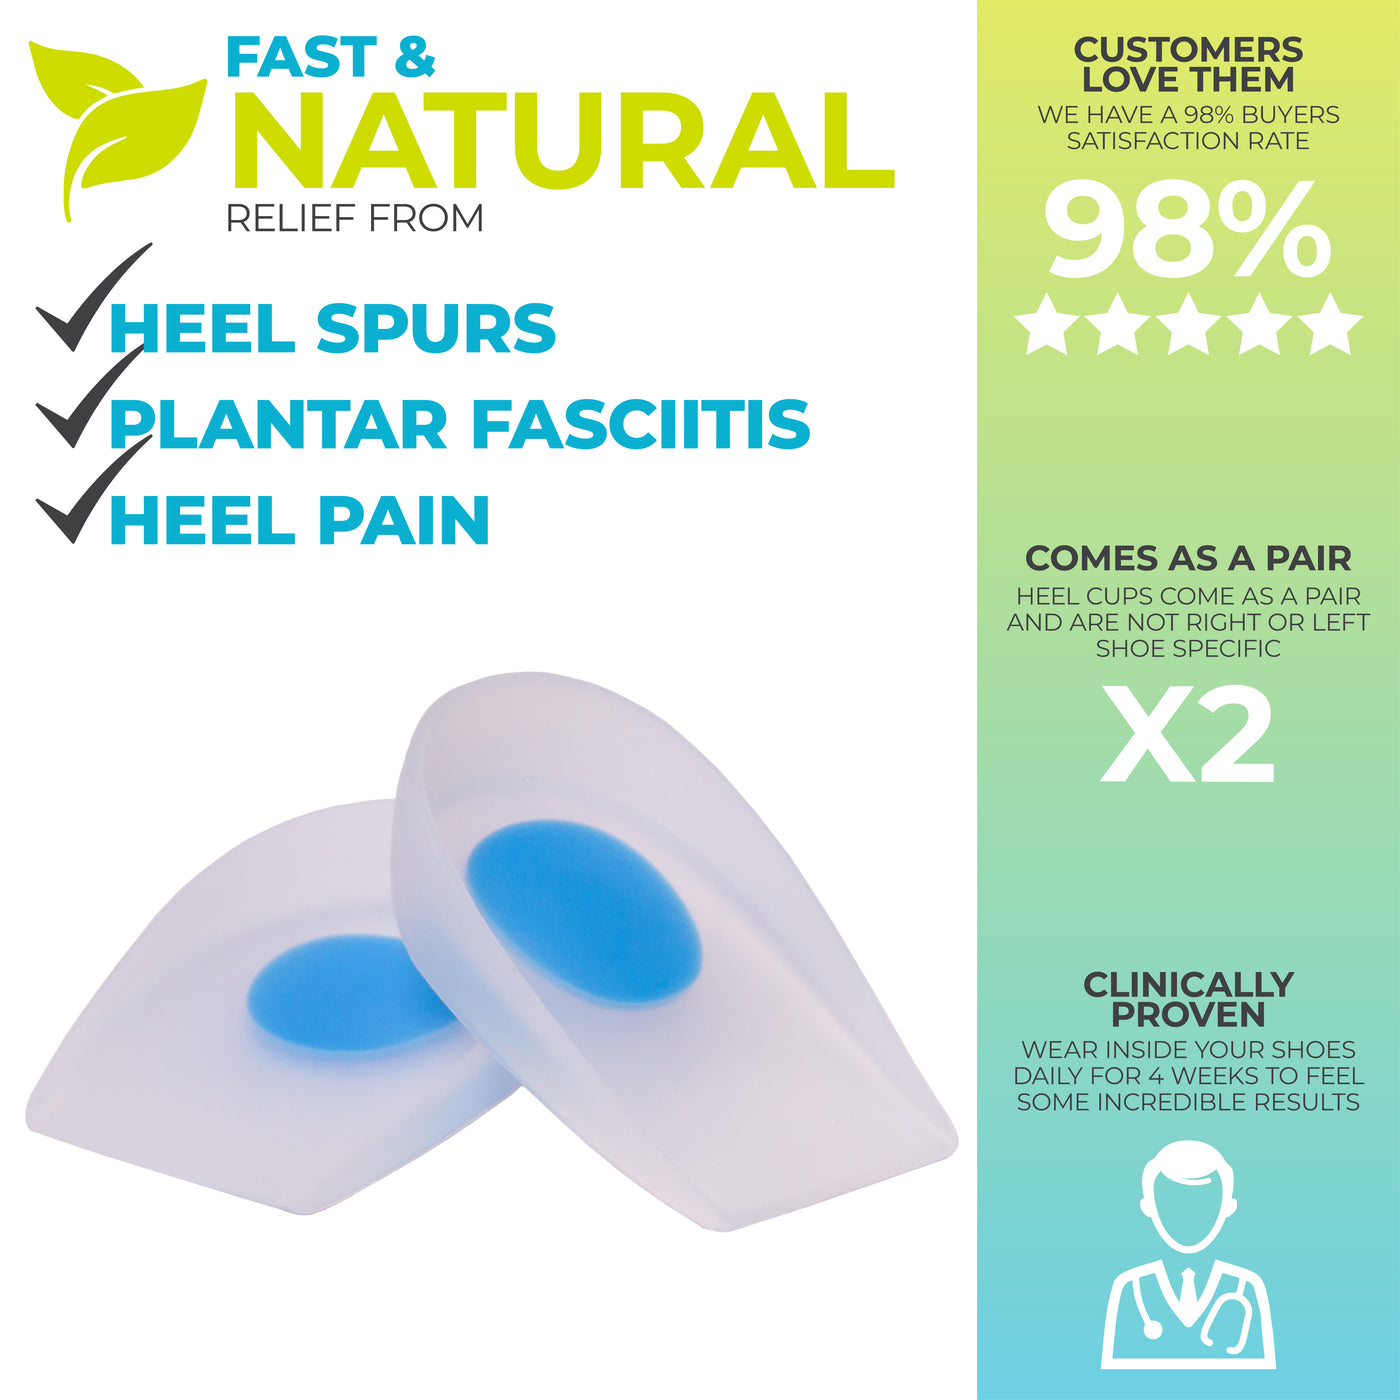 use our heel spur cups for plantar fasciitis and heel pain